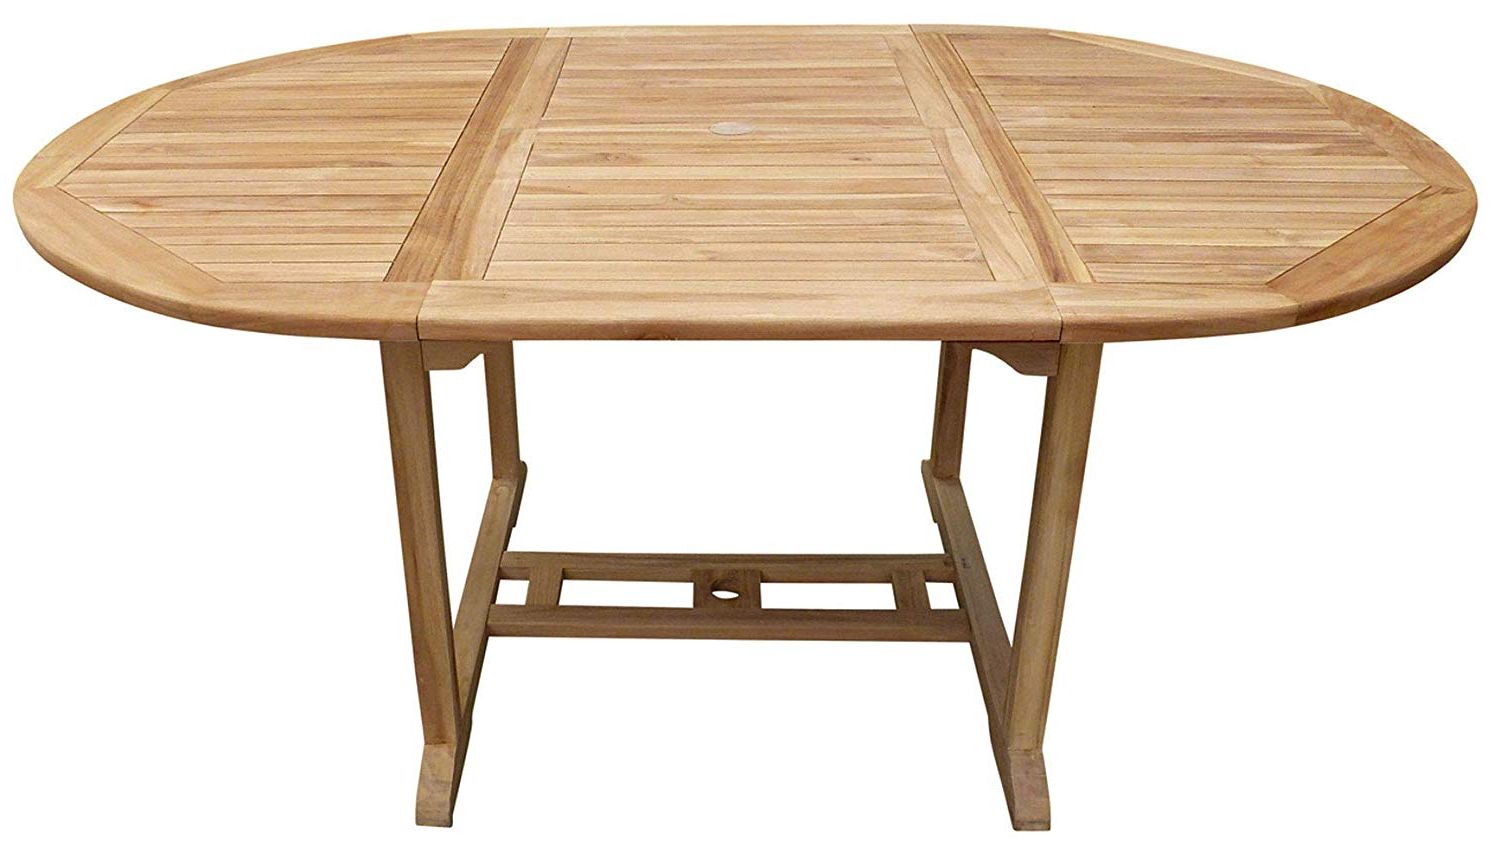 2020 Amazon : Seven Seas Teak Ocean Beach Round To Oval For Menlo Reclaimed Wood Extending Dining Tables (View 25 of 25)